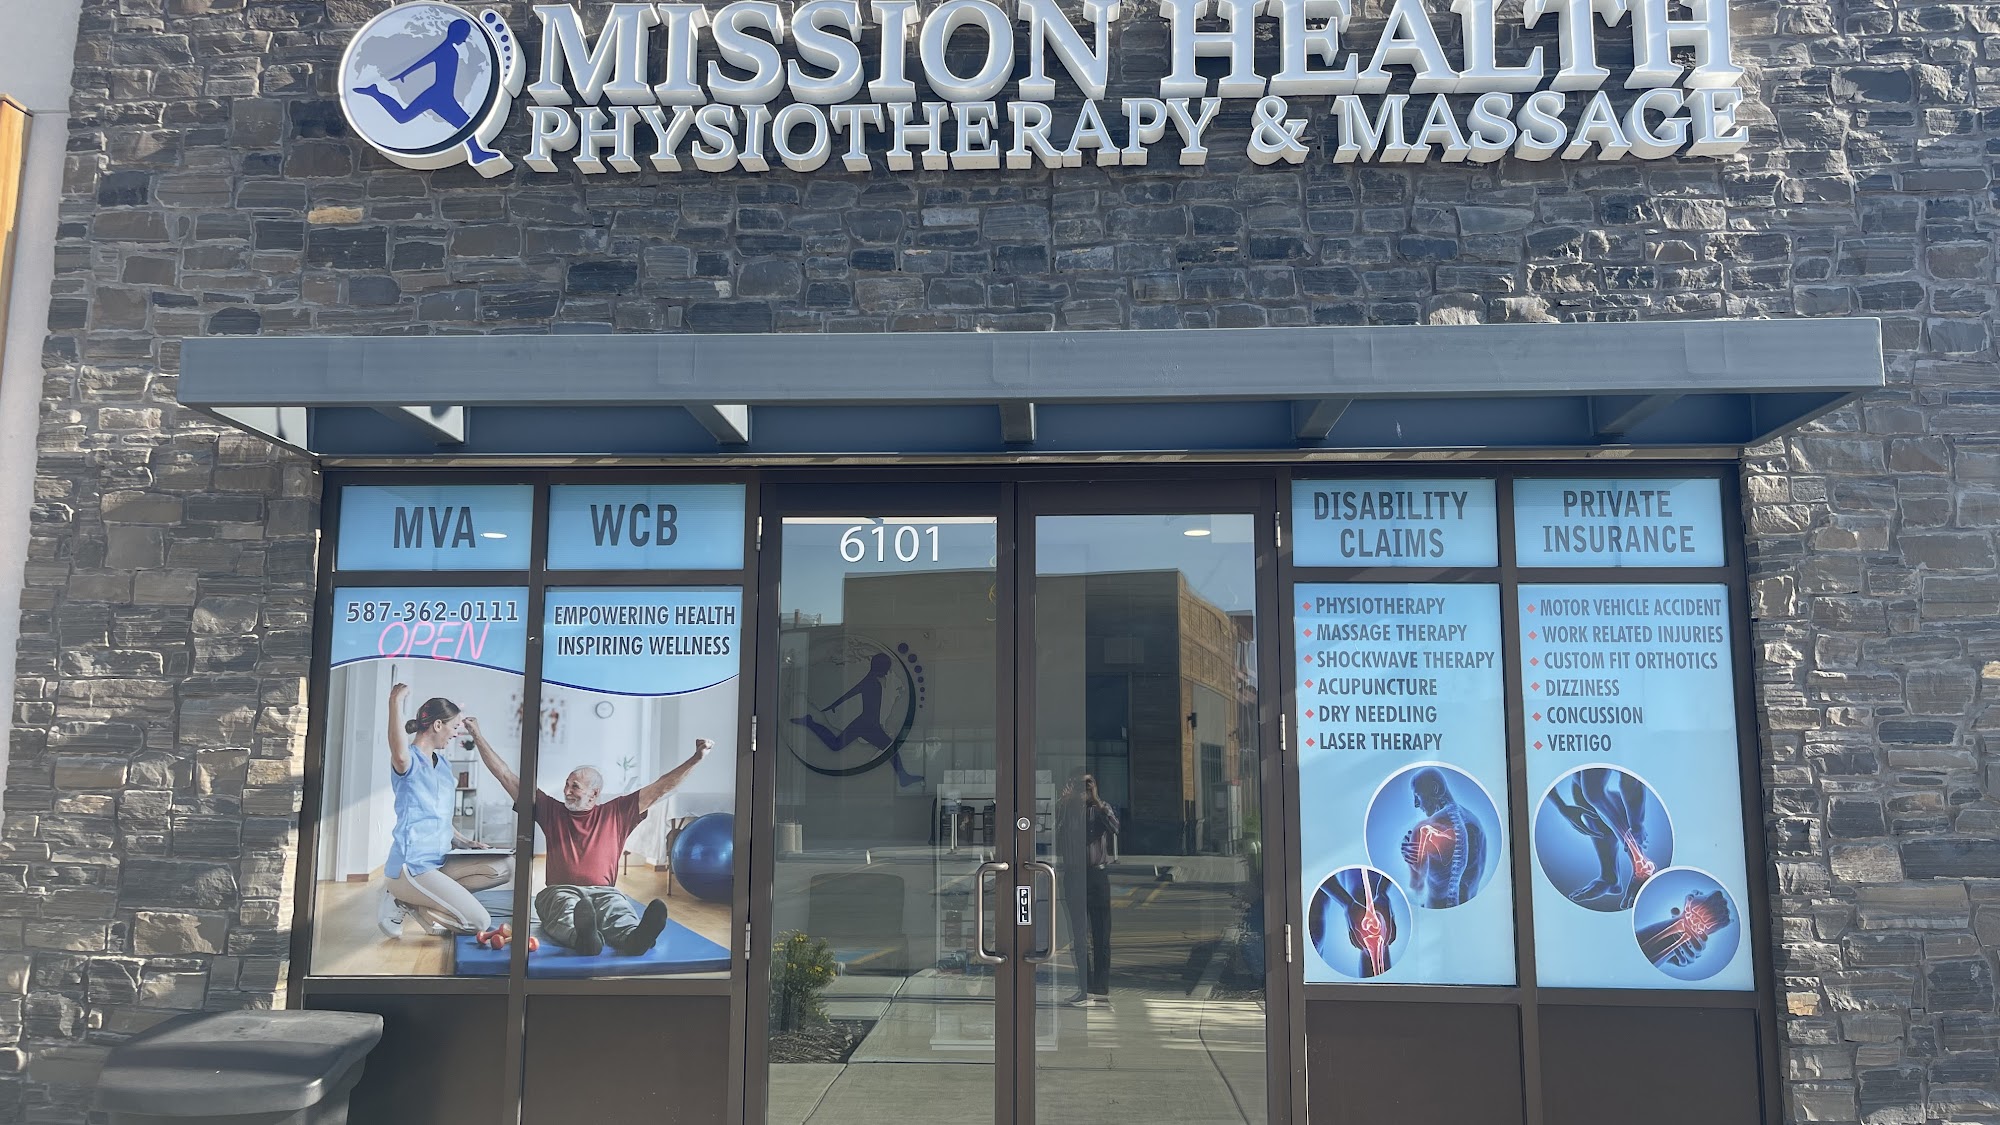 Mission Health Physiotherapy & Massage